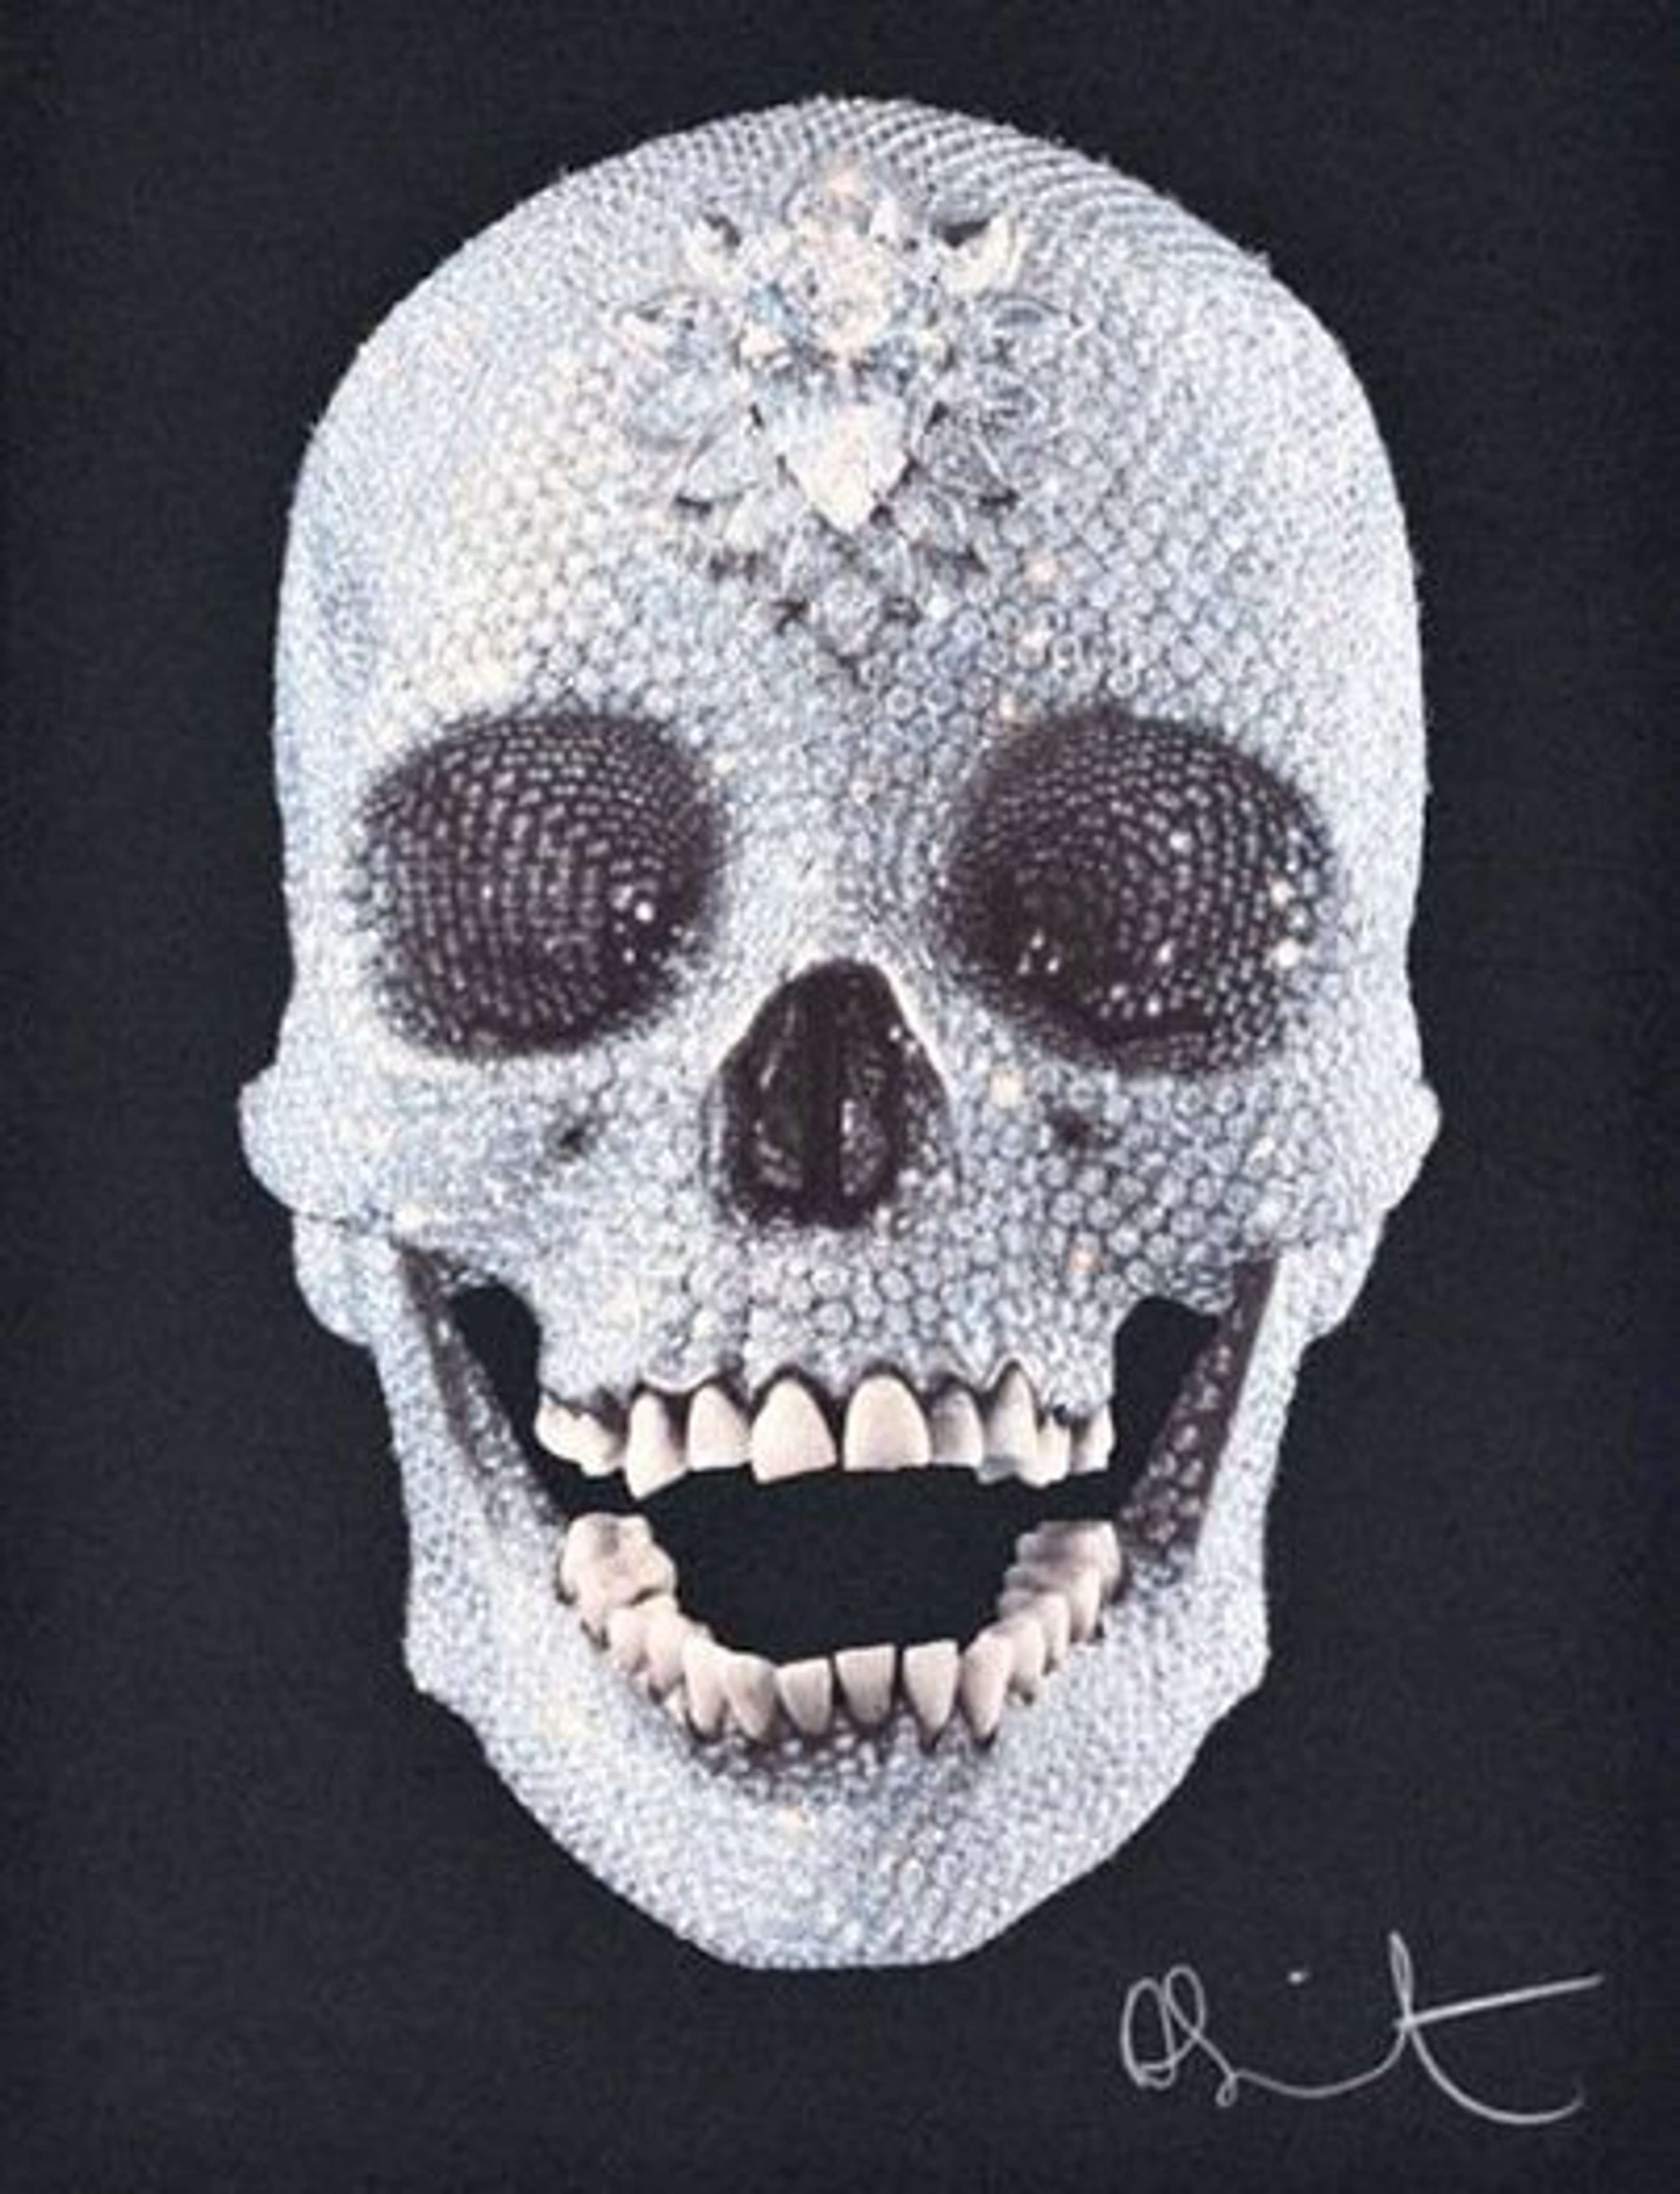 For The Love Of God (black) by Damien Hirst